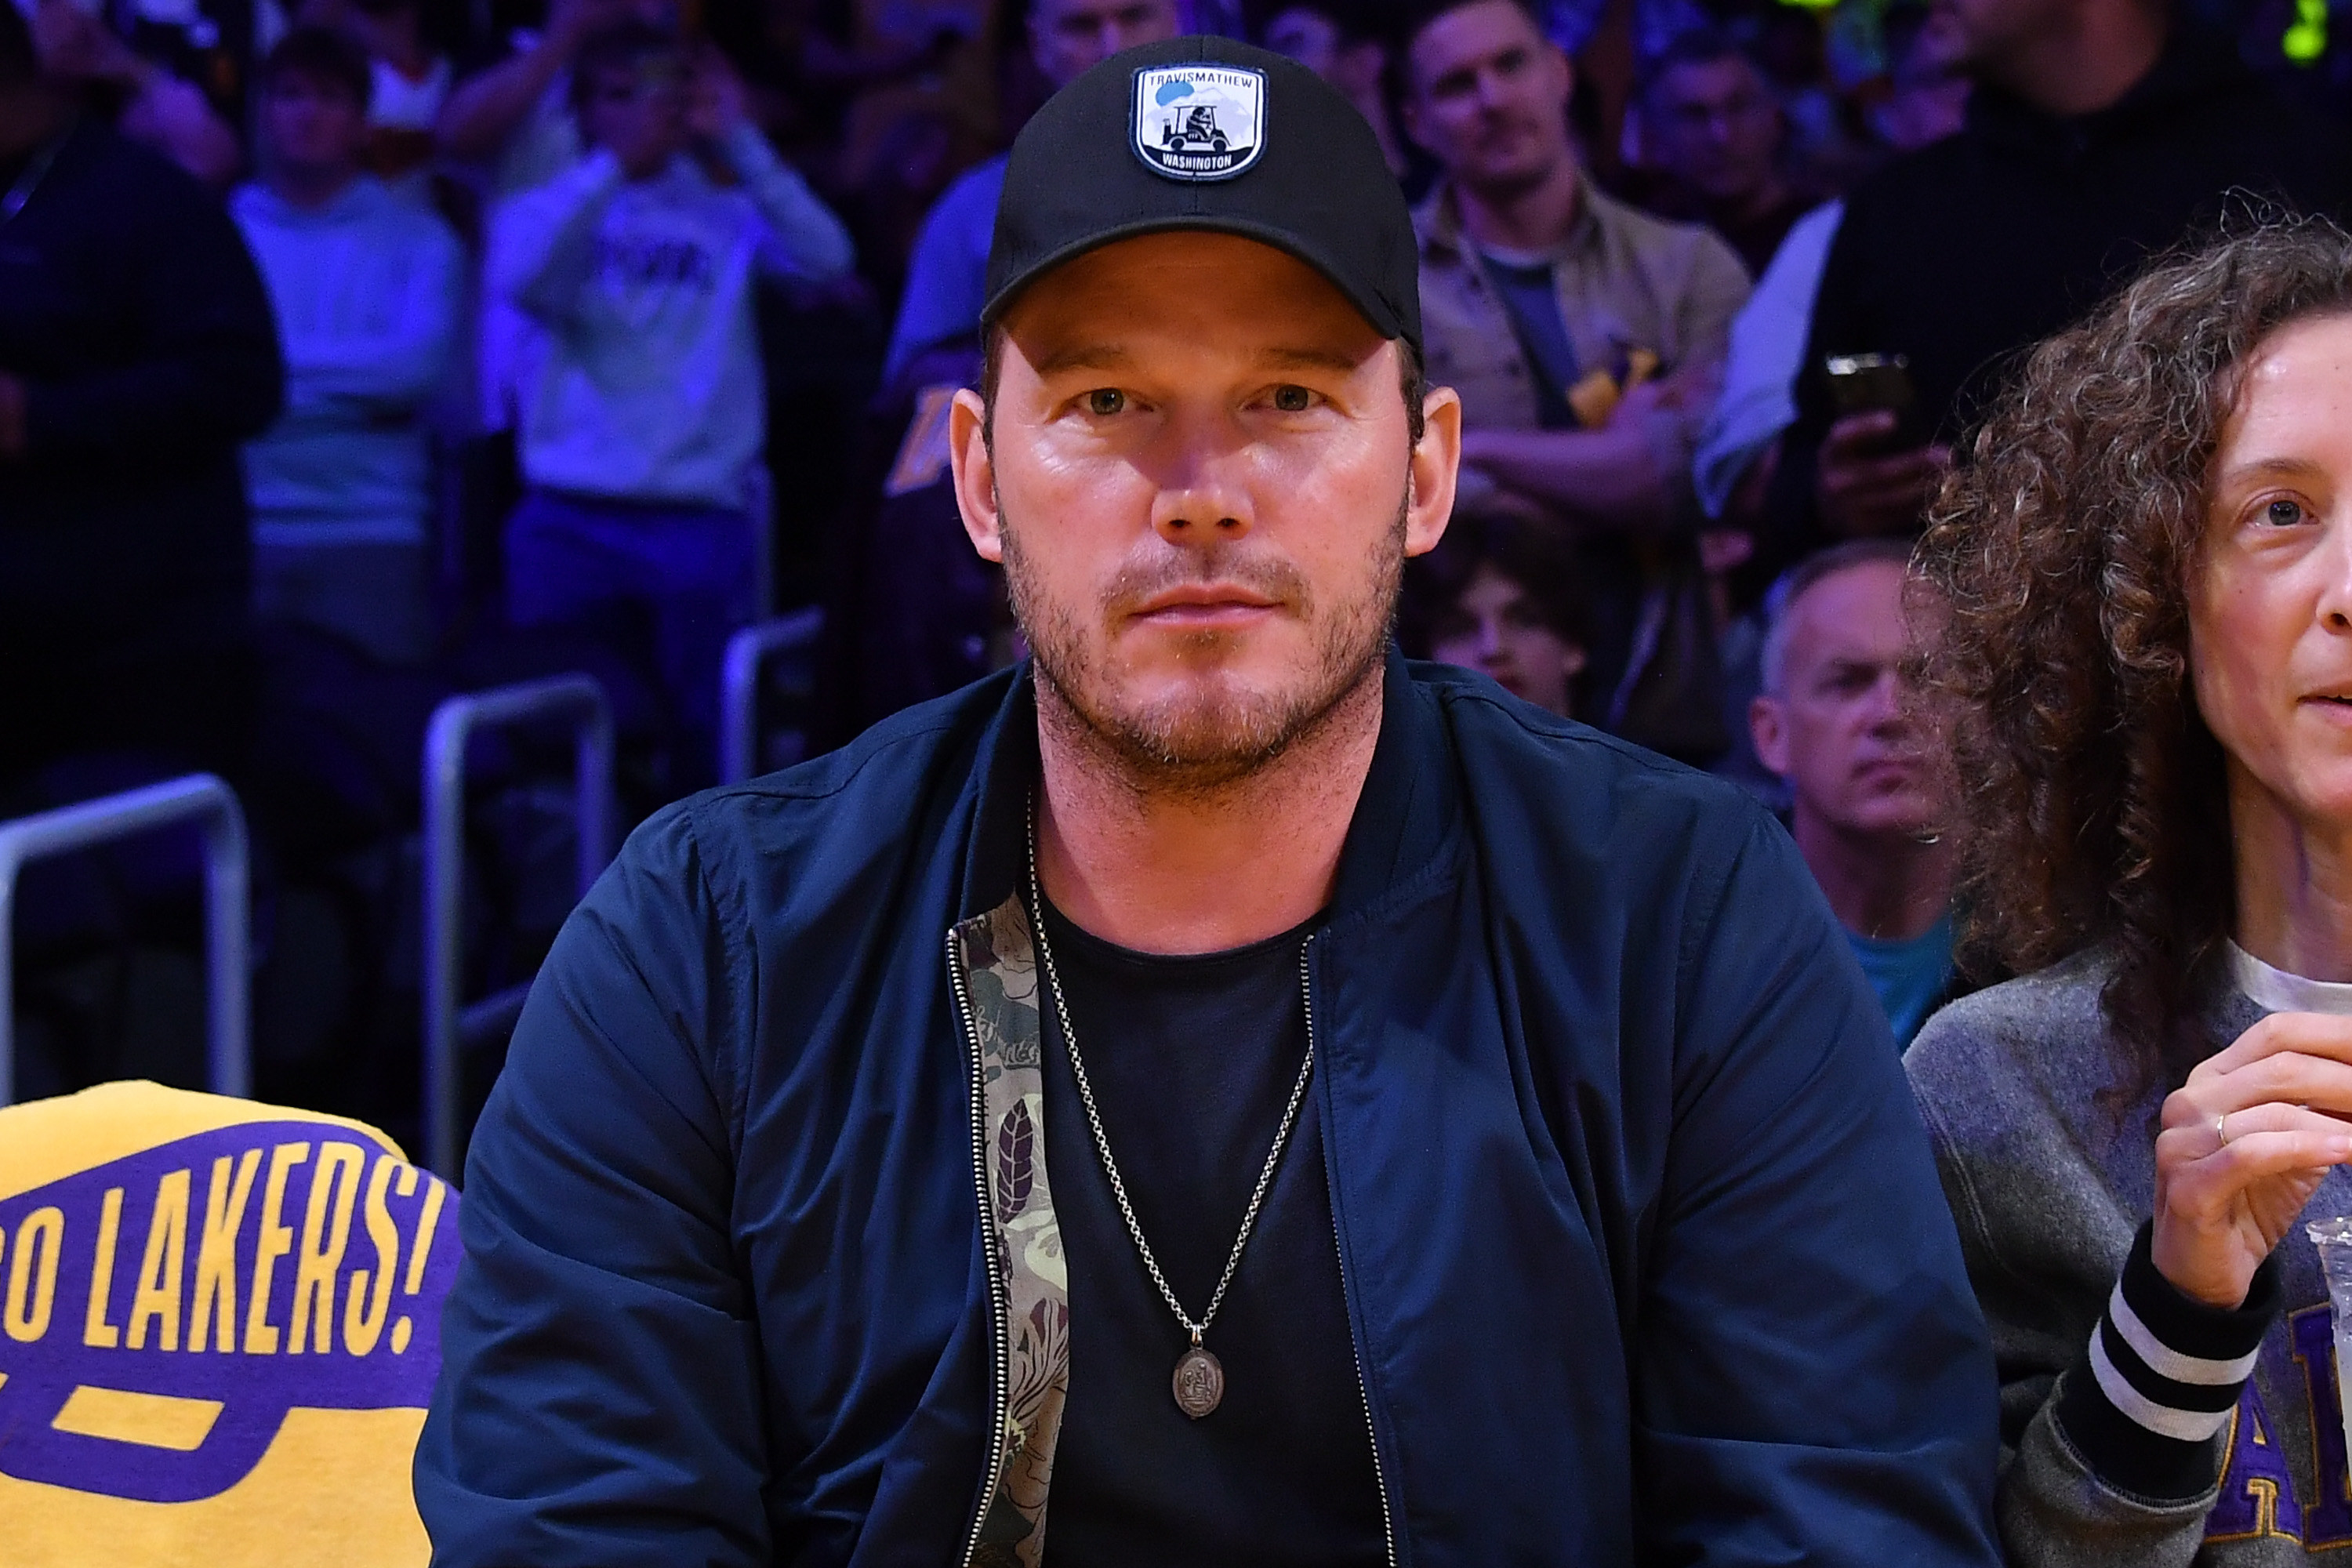 Chris Pratt sitting court-side at the Lakers/Warriors basketball game